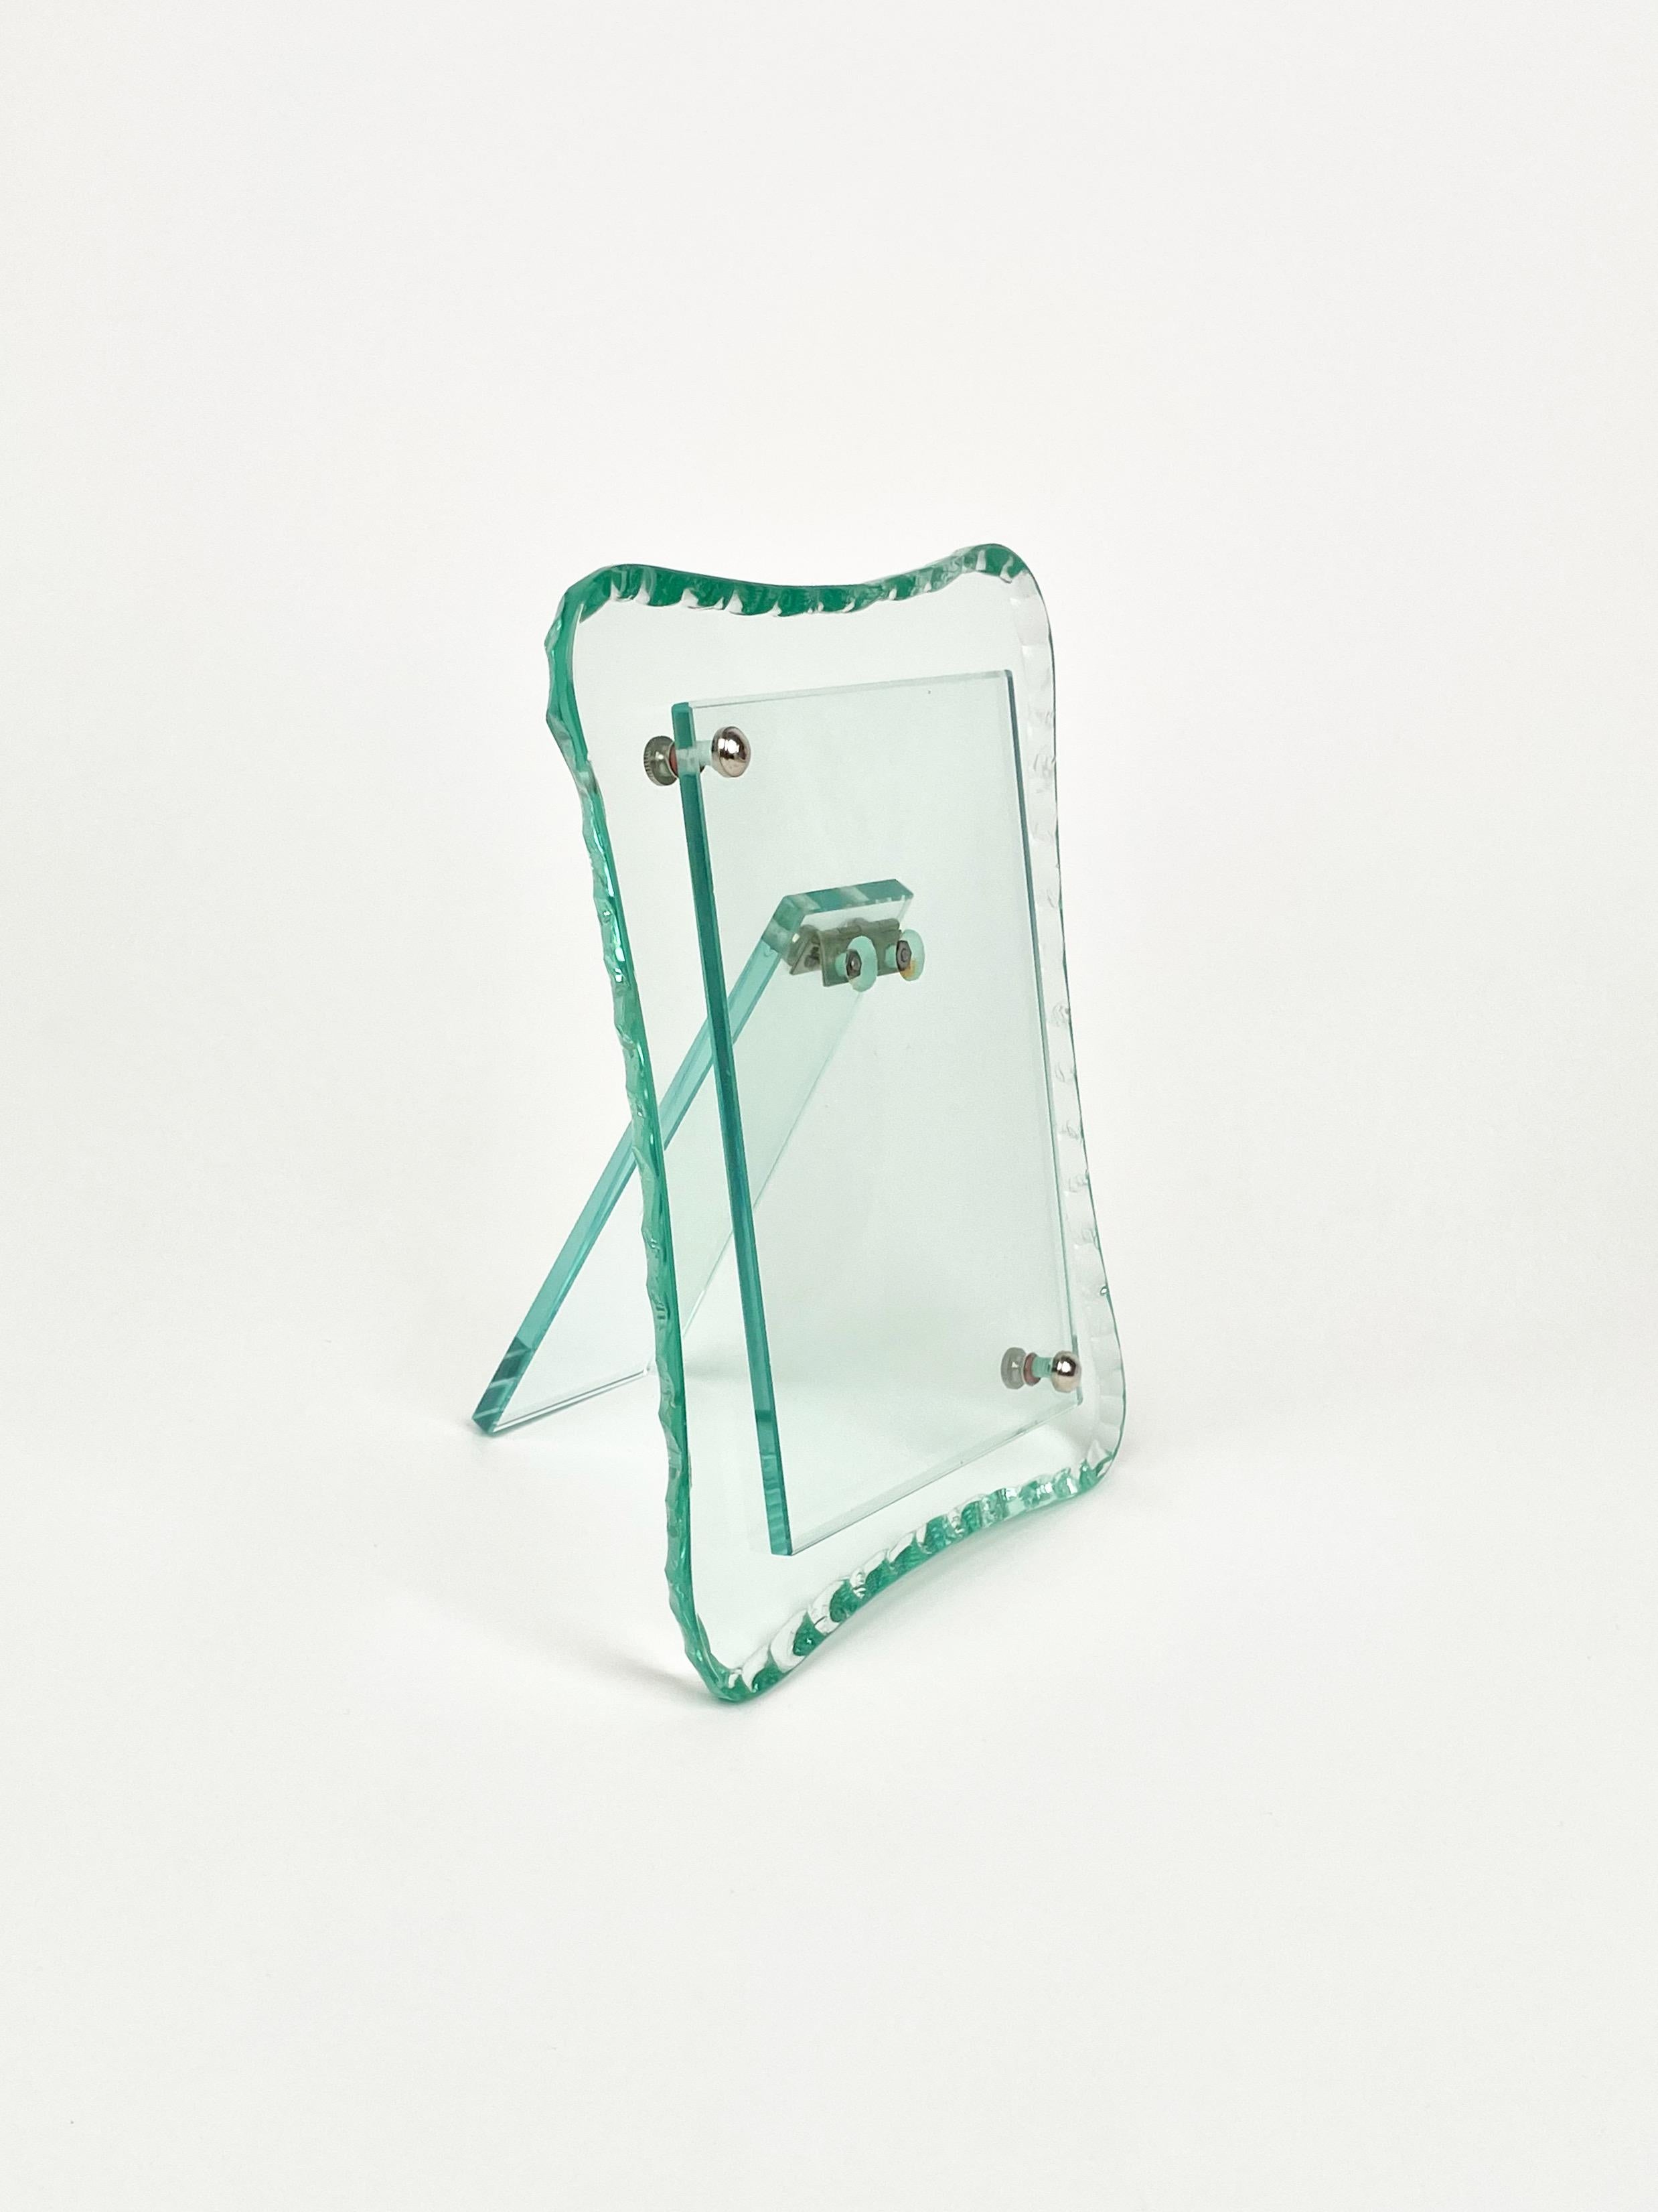 Rectangular picture frame in green glass decorated with chiseled edges and two silver metal buttons attributed to Fontana Arte.

Made in Italy in the 1960s.